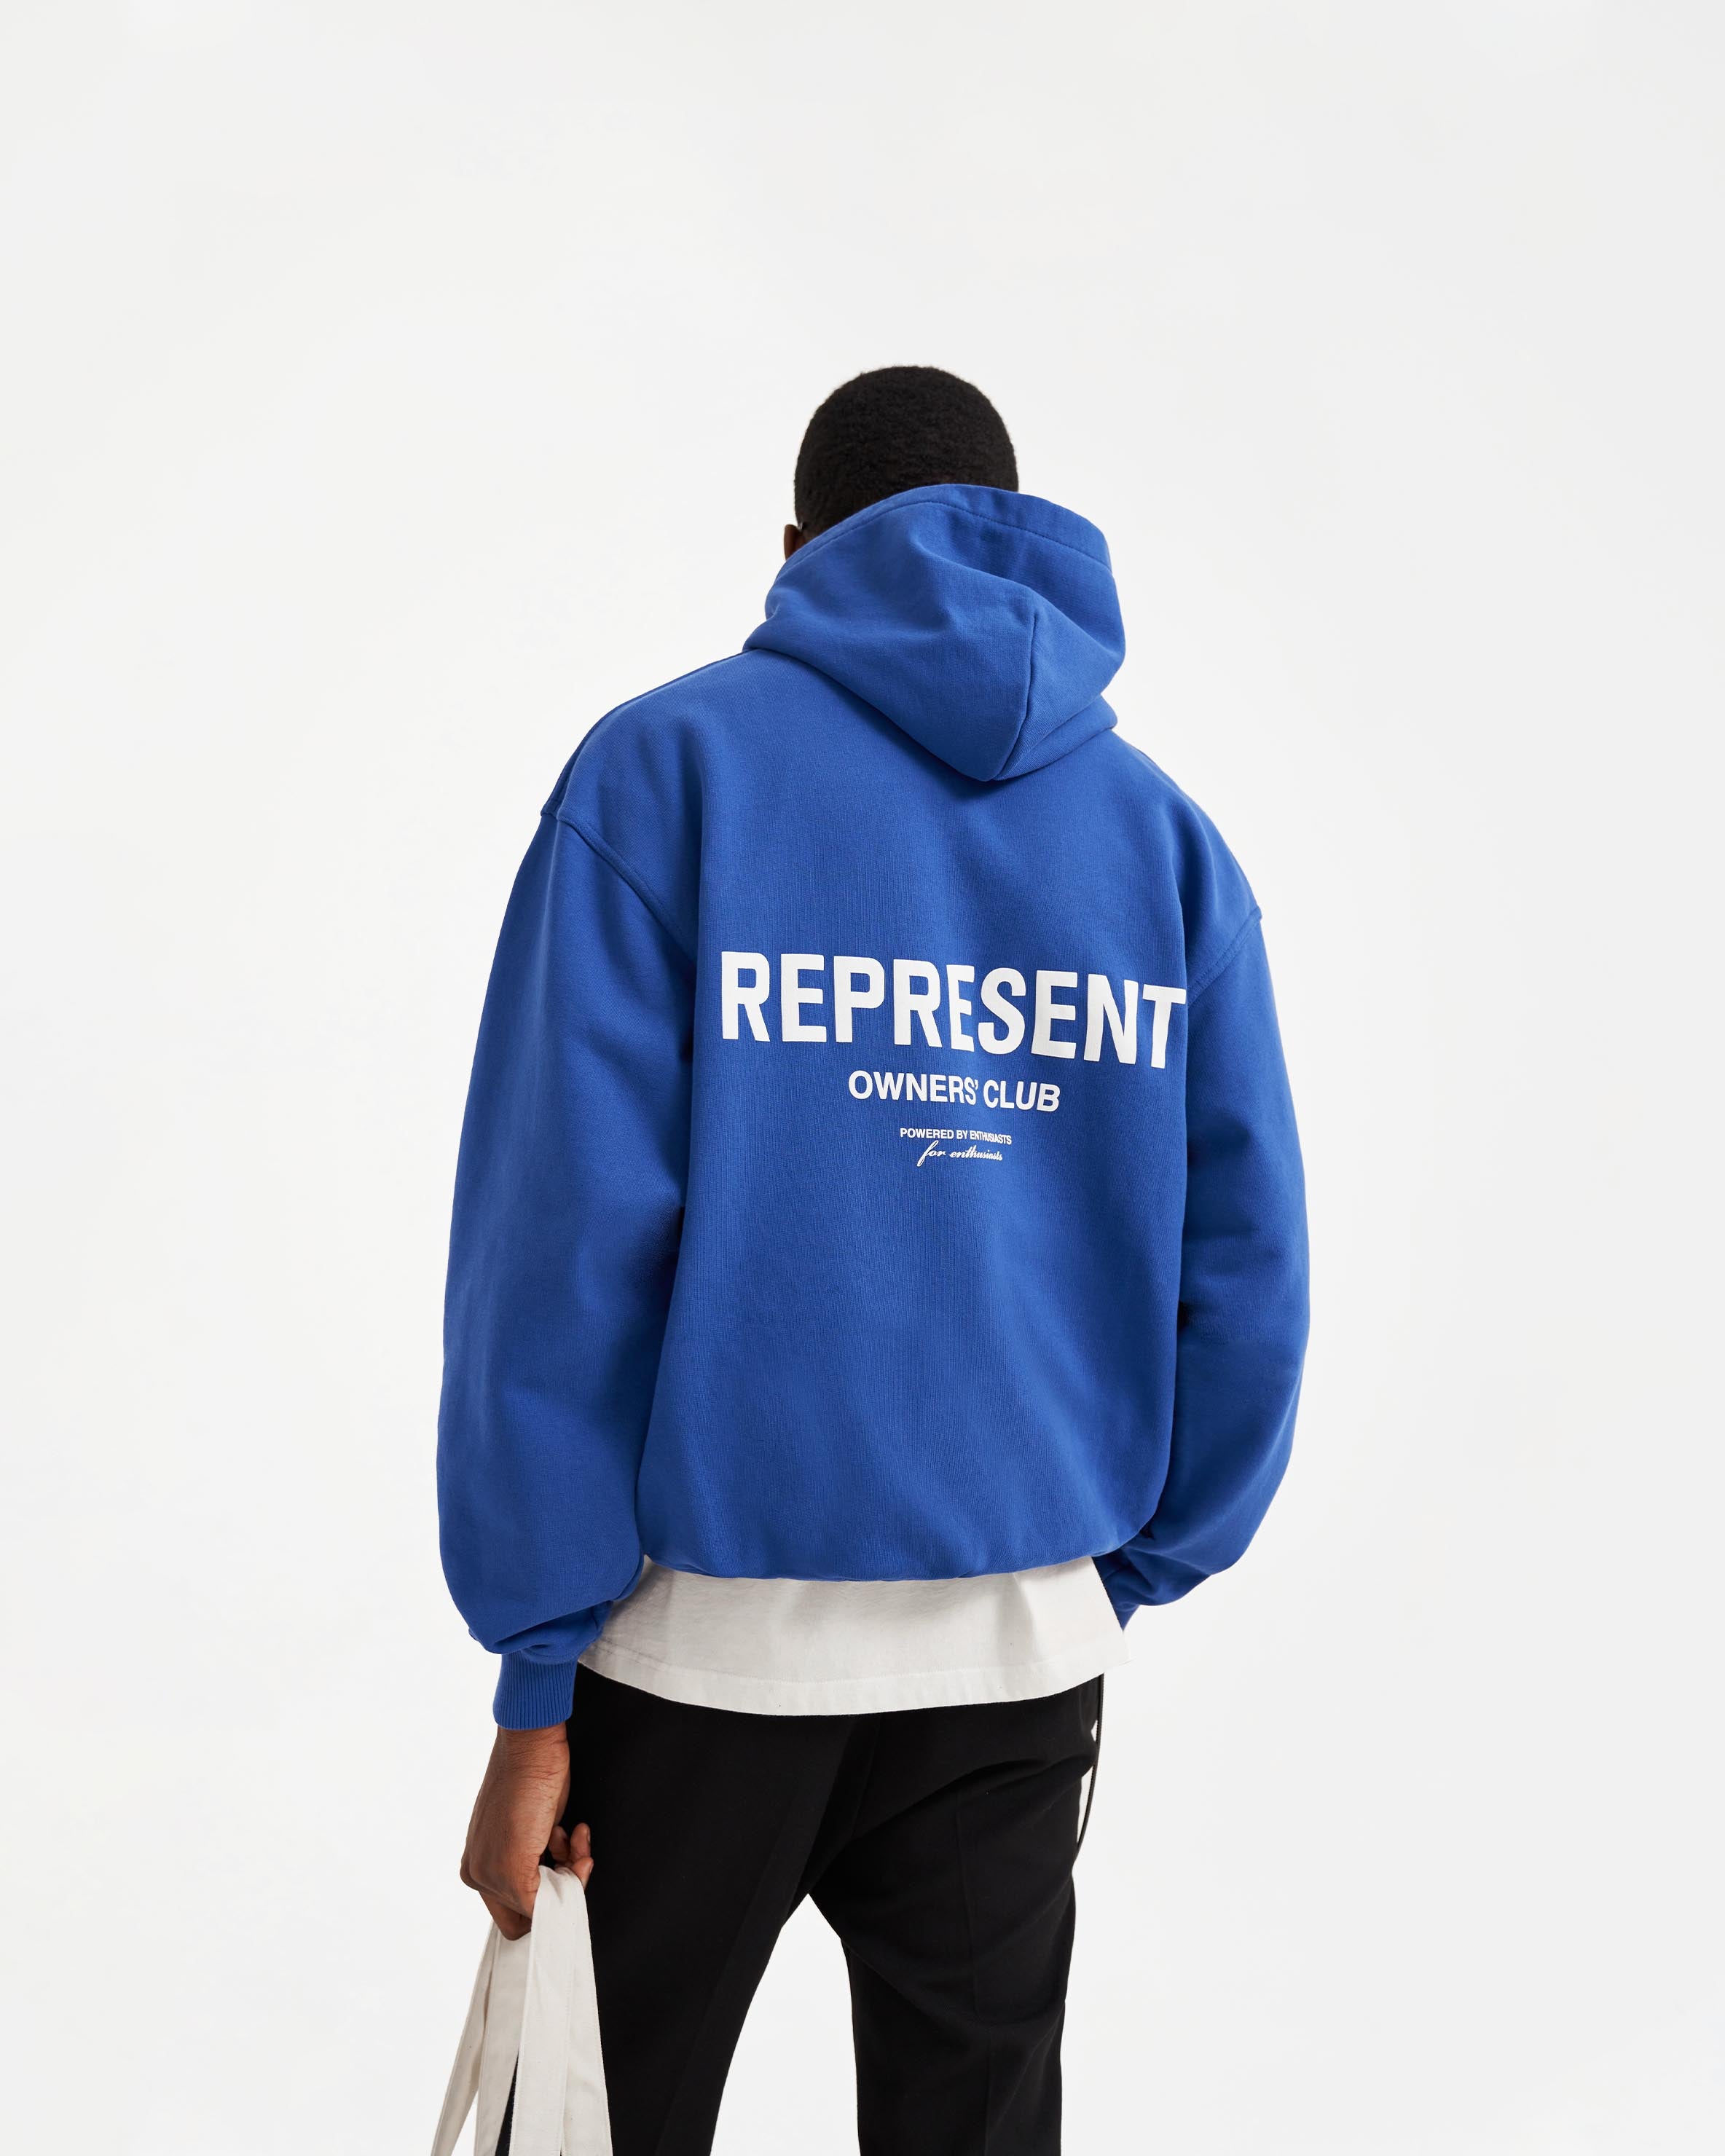 styling the monochrome cobalt blue hoodie